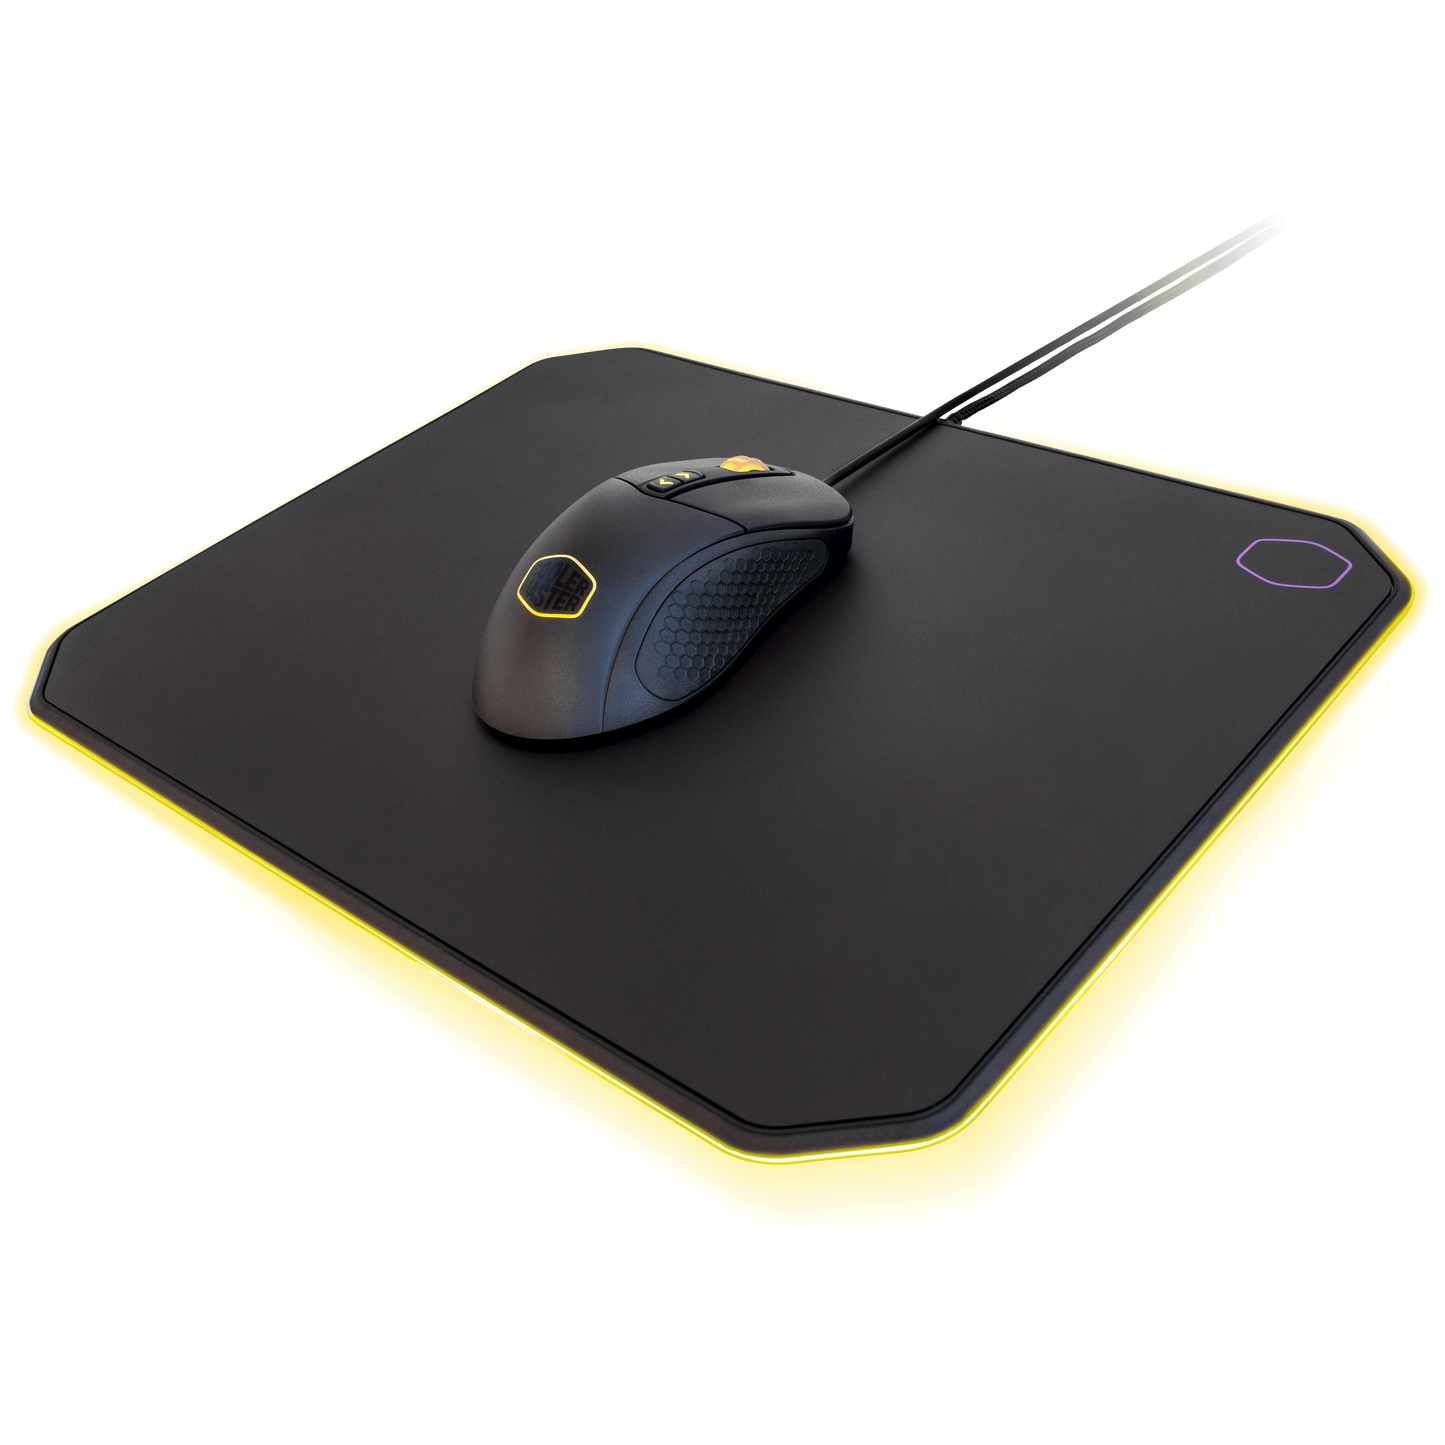 Cooler Master MP860 - Dual-sided Gaming Mouse pad